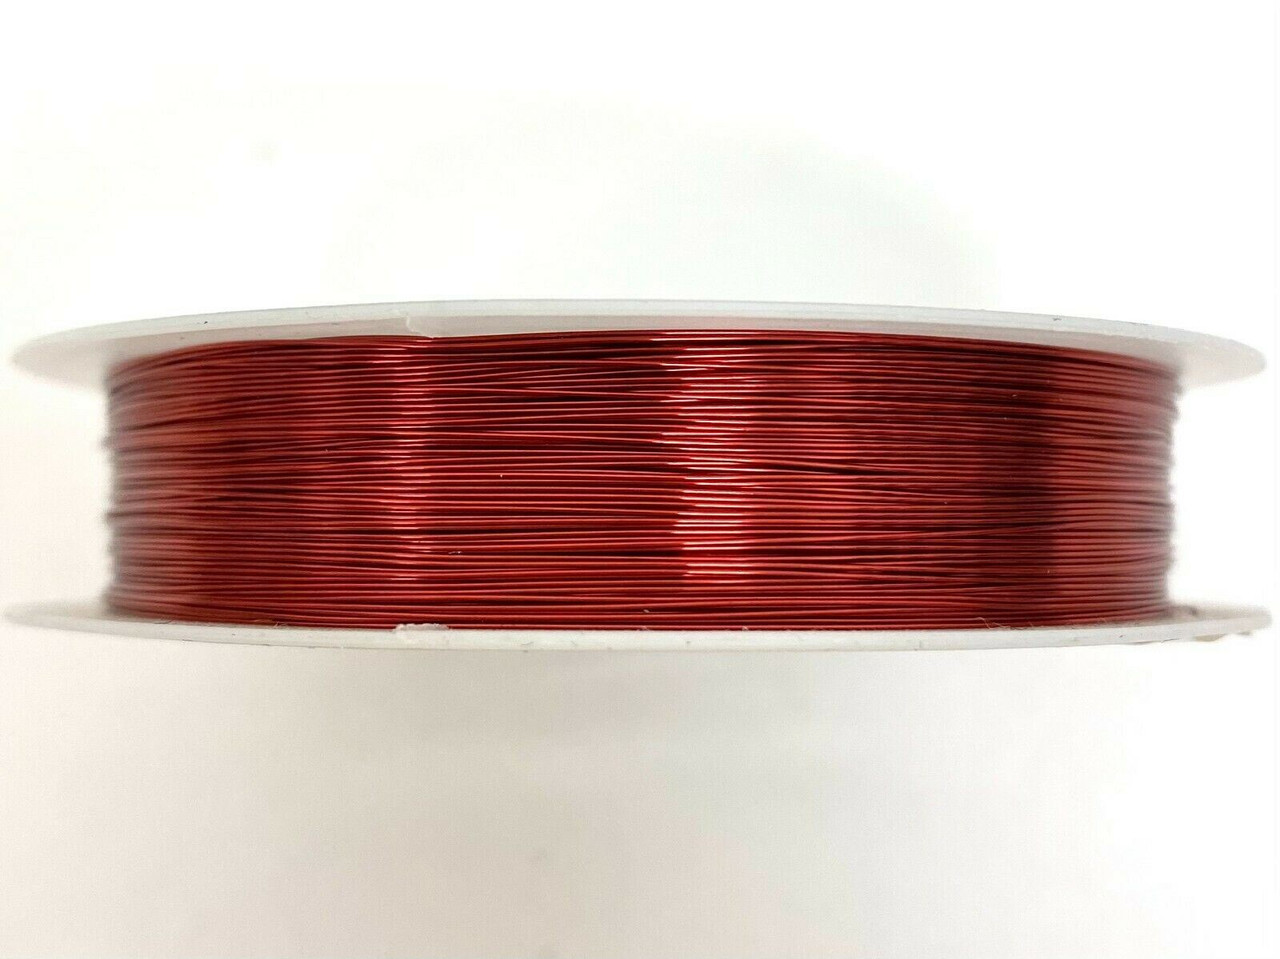 Roll of Copper Wire, 0.3mm thickness, DARK RED colour, approx 26m length